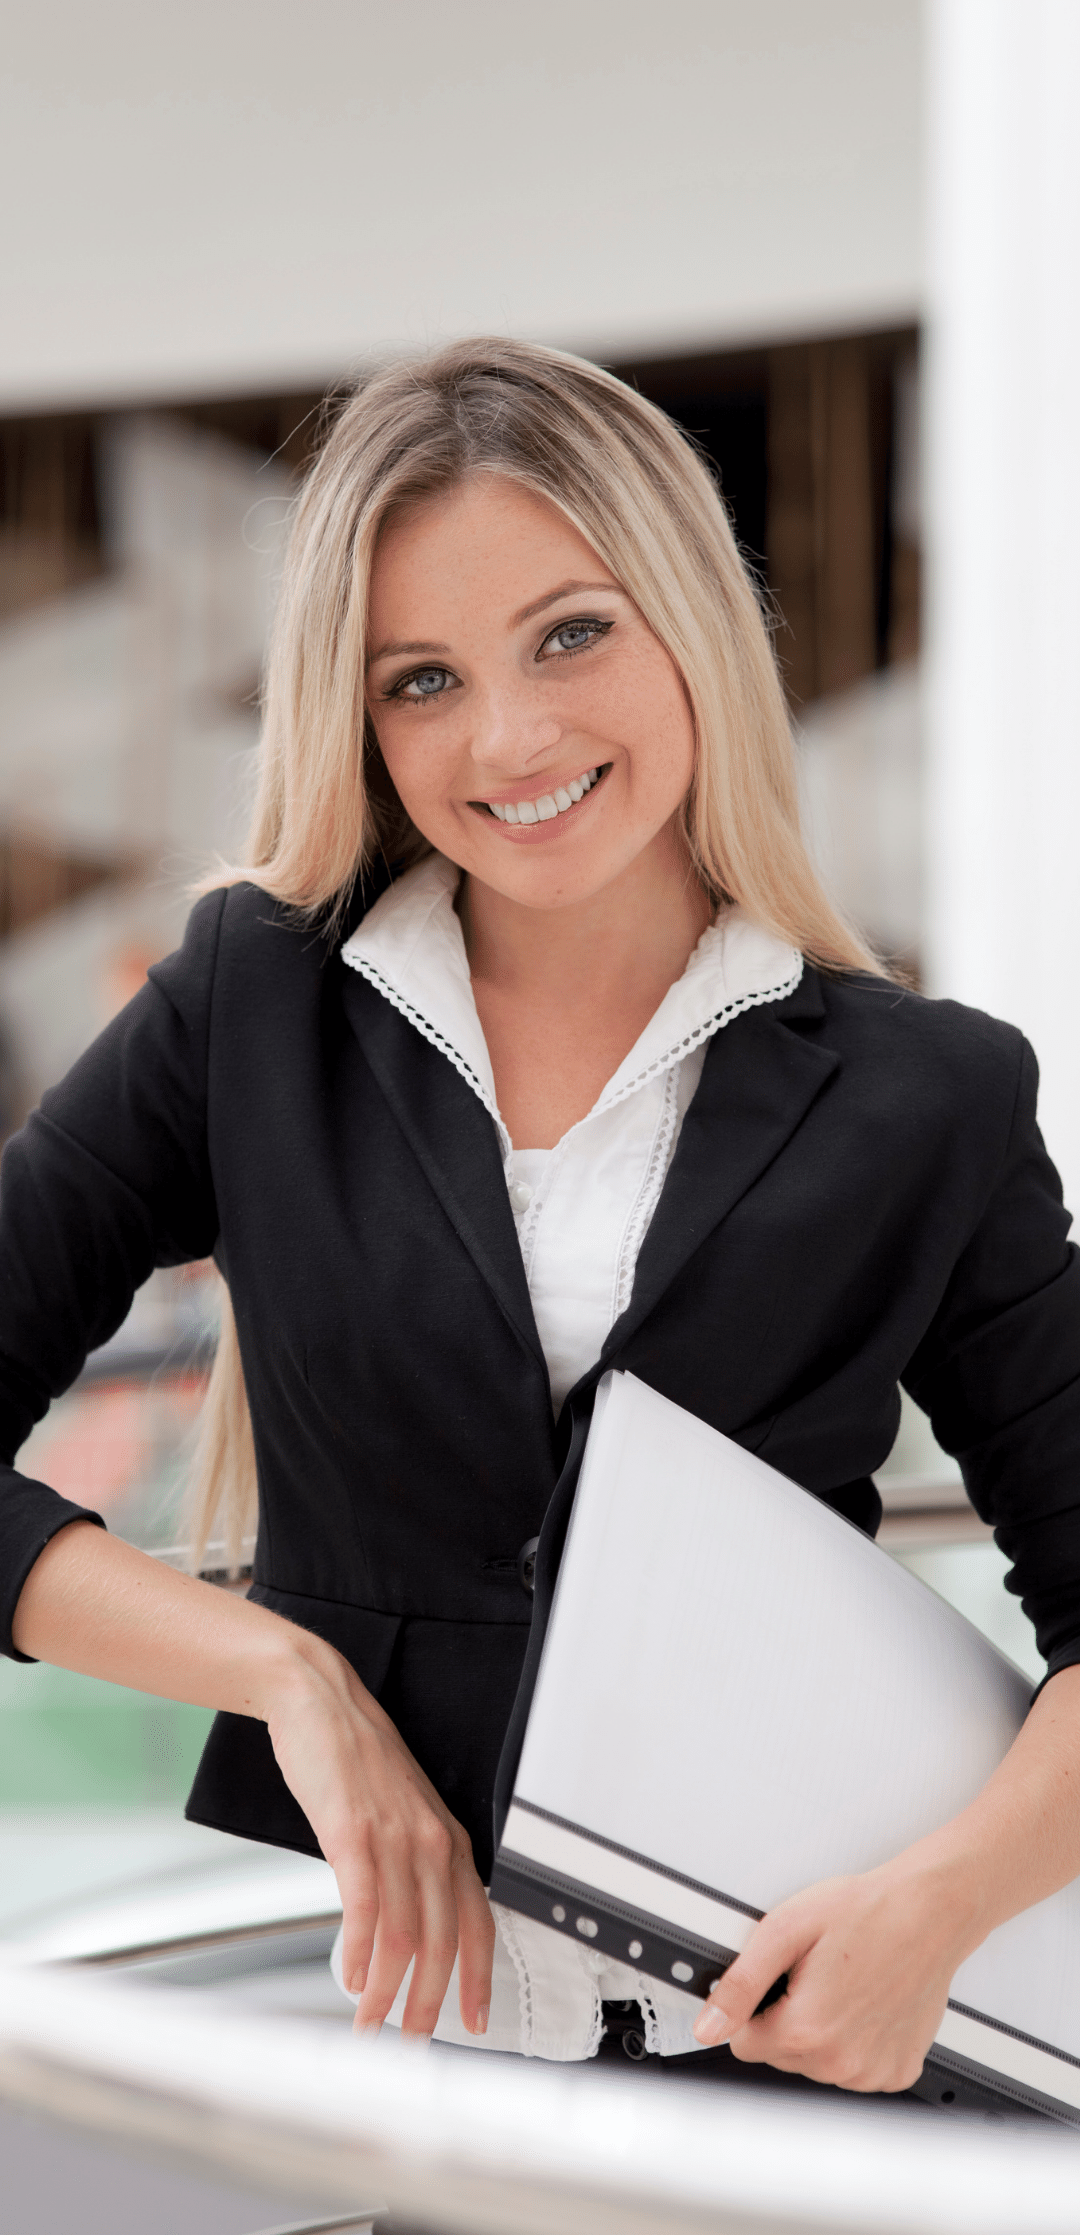 smiling-female-hr-handshaking-businesswoman-at-group-meeting-or-interview